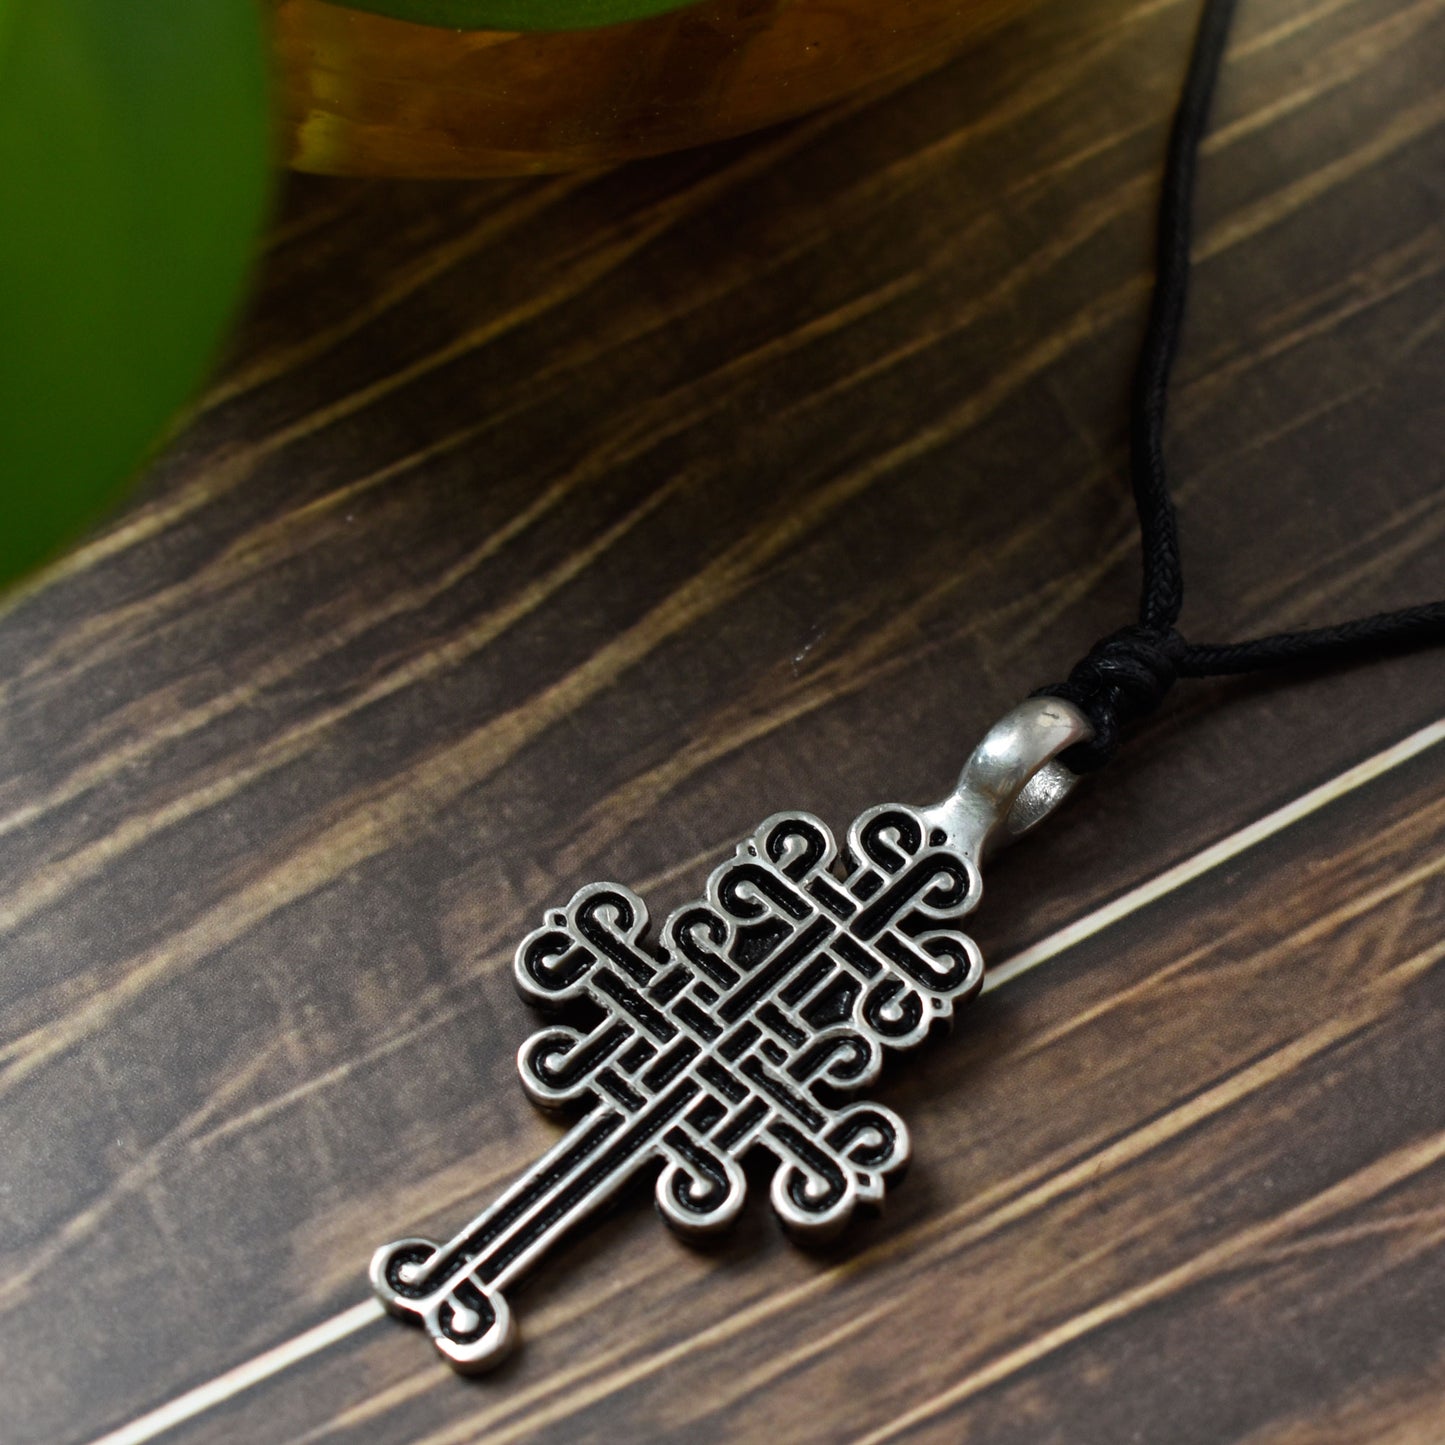 New Tree of Life Celtic Cross Silver Pewter Charm Necklace Pendant Jewelry